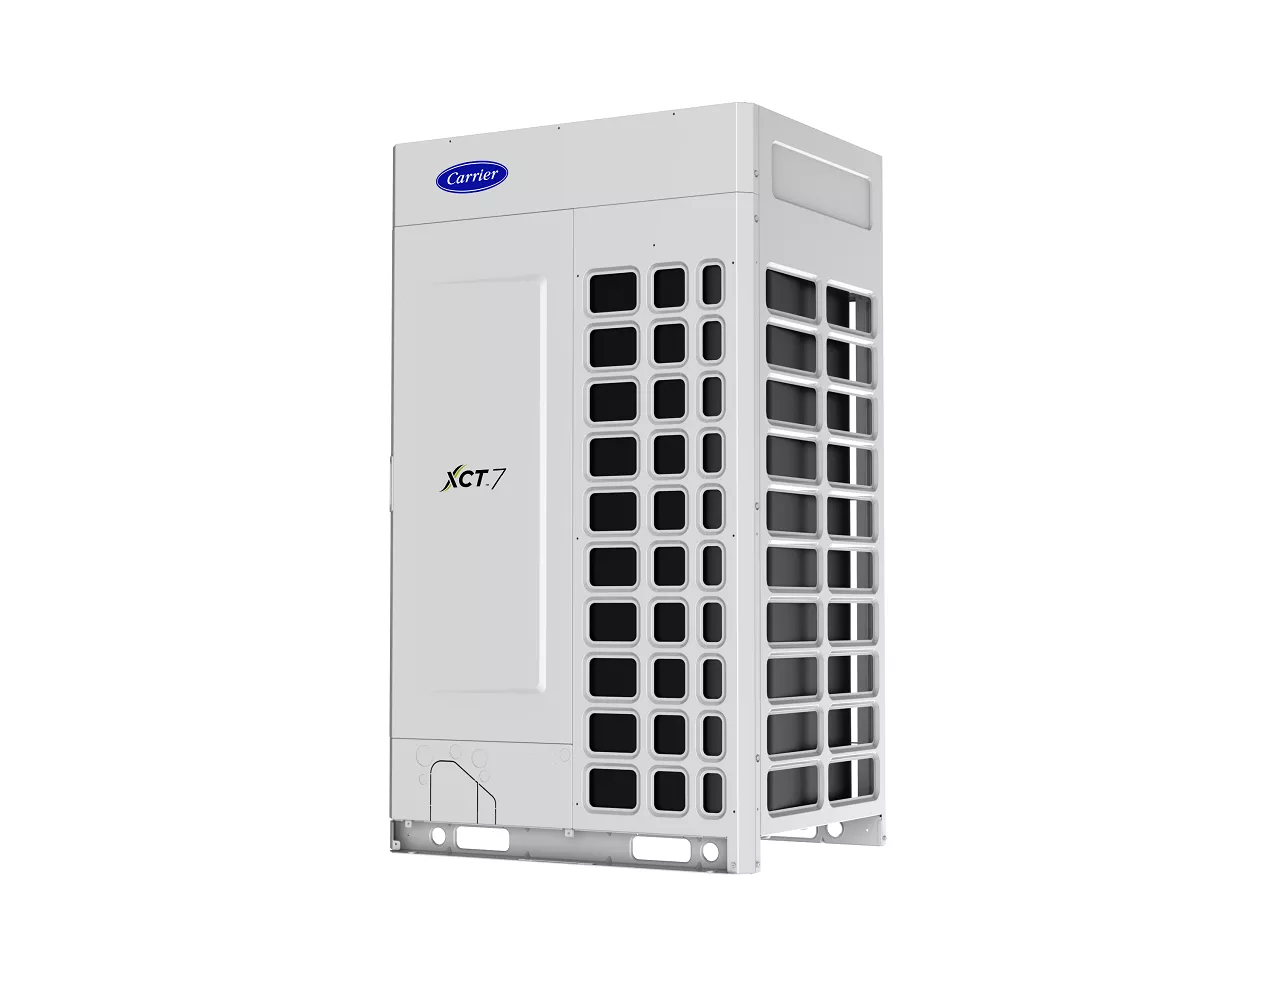 Carrier Introduces its Latest Generation of Variable Refrigerant FlowSystems XCT7